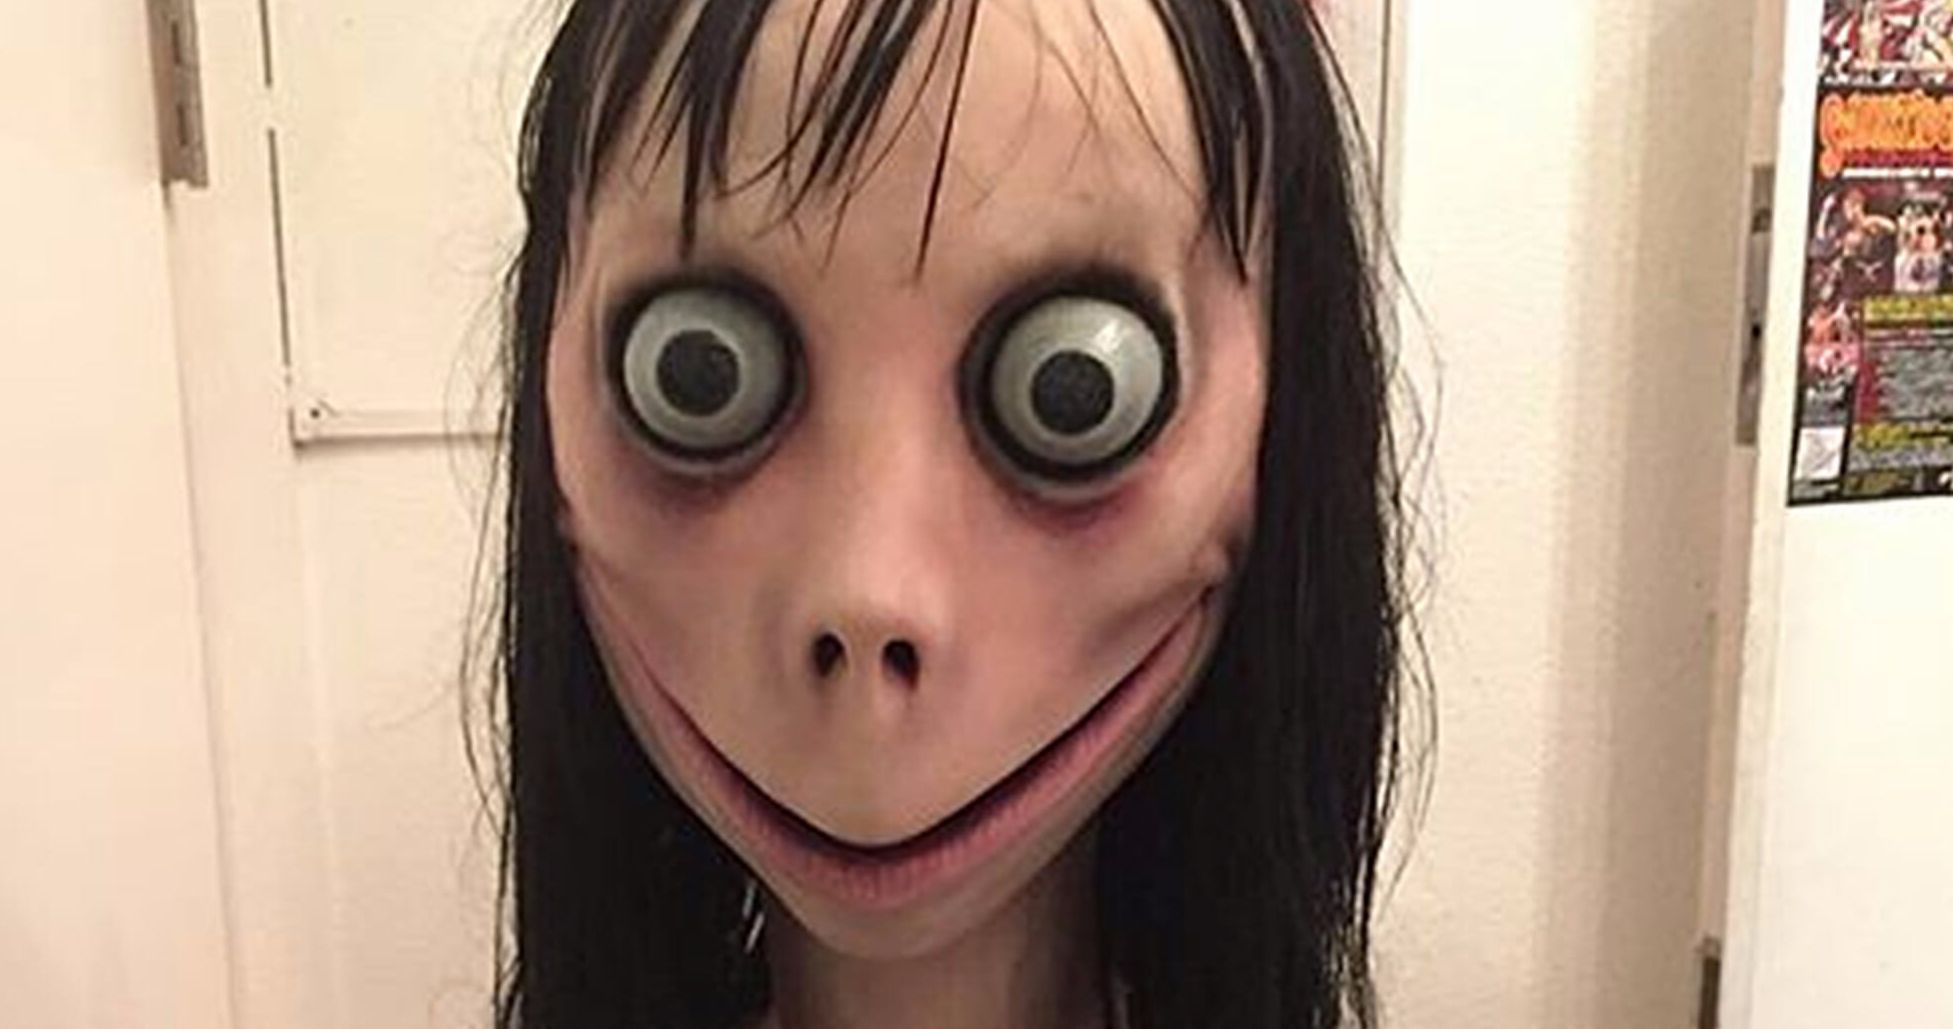 Second Momo Movie Is on the Way, Will Turn Viral Hoax Into Horror Movie